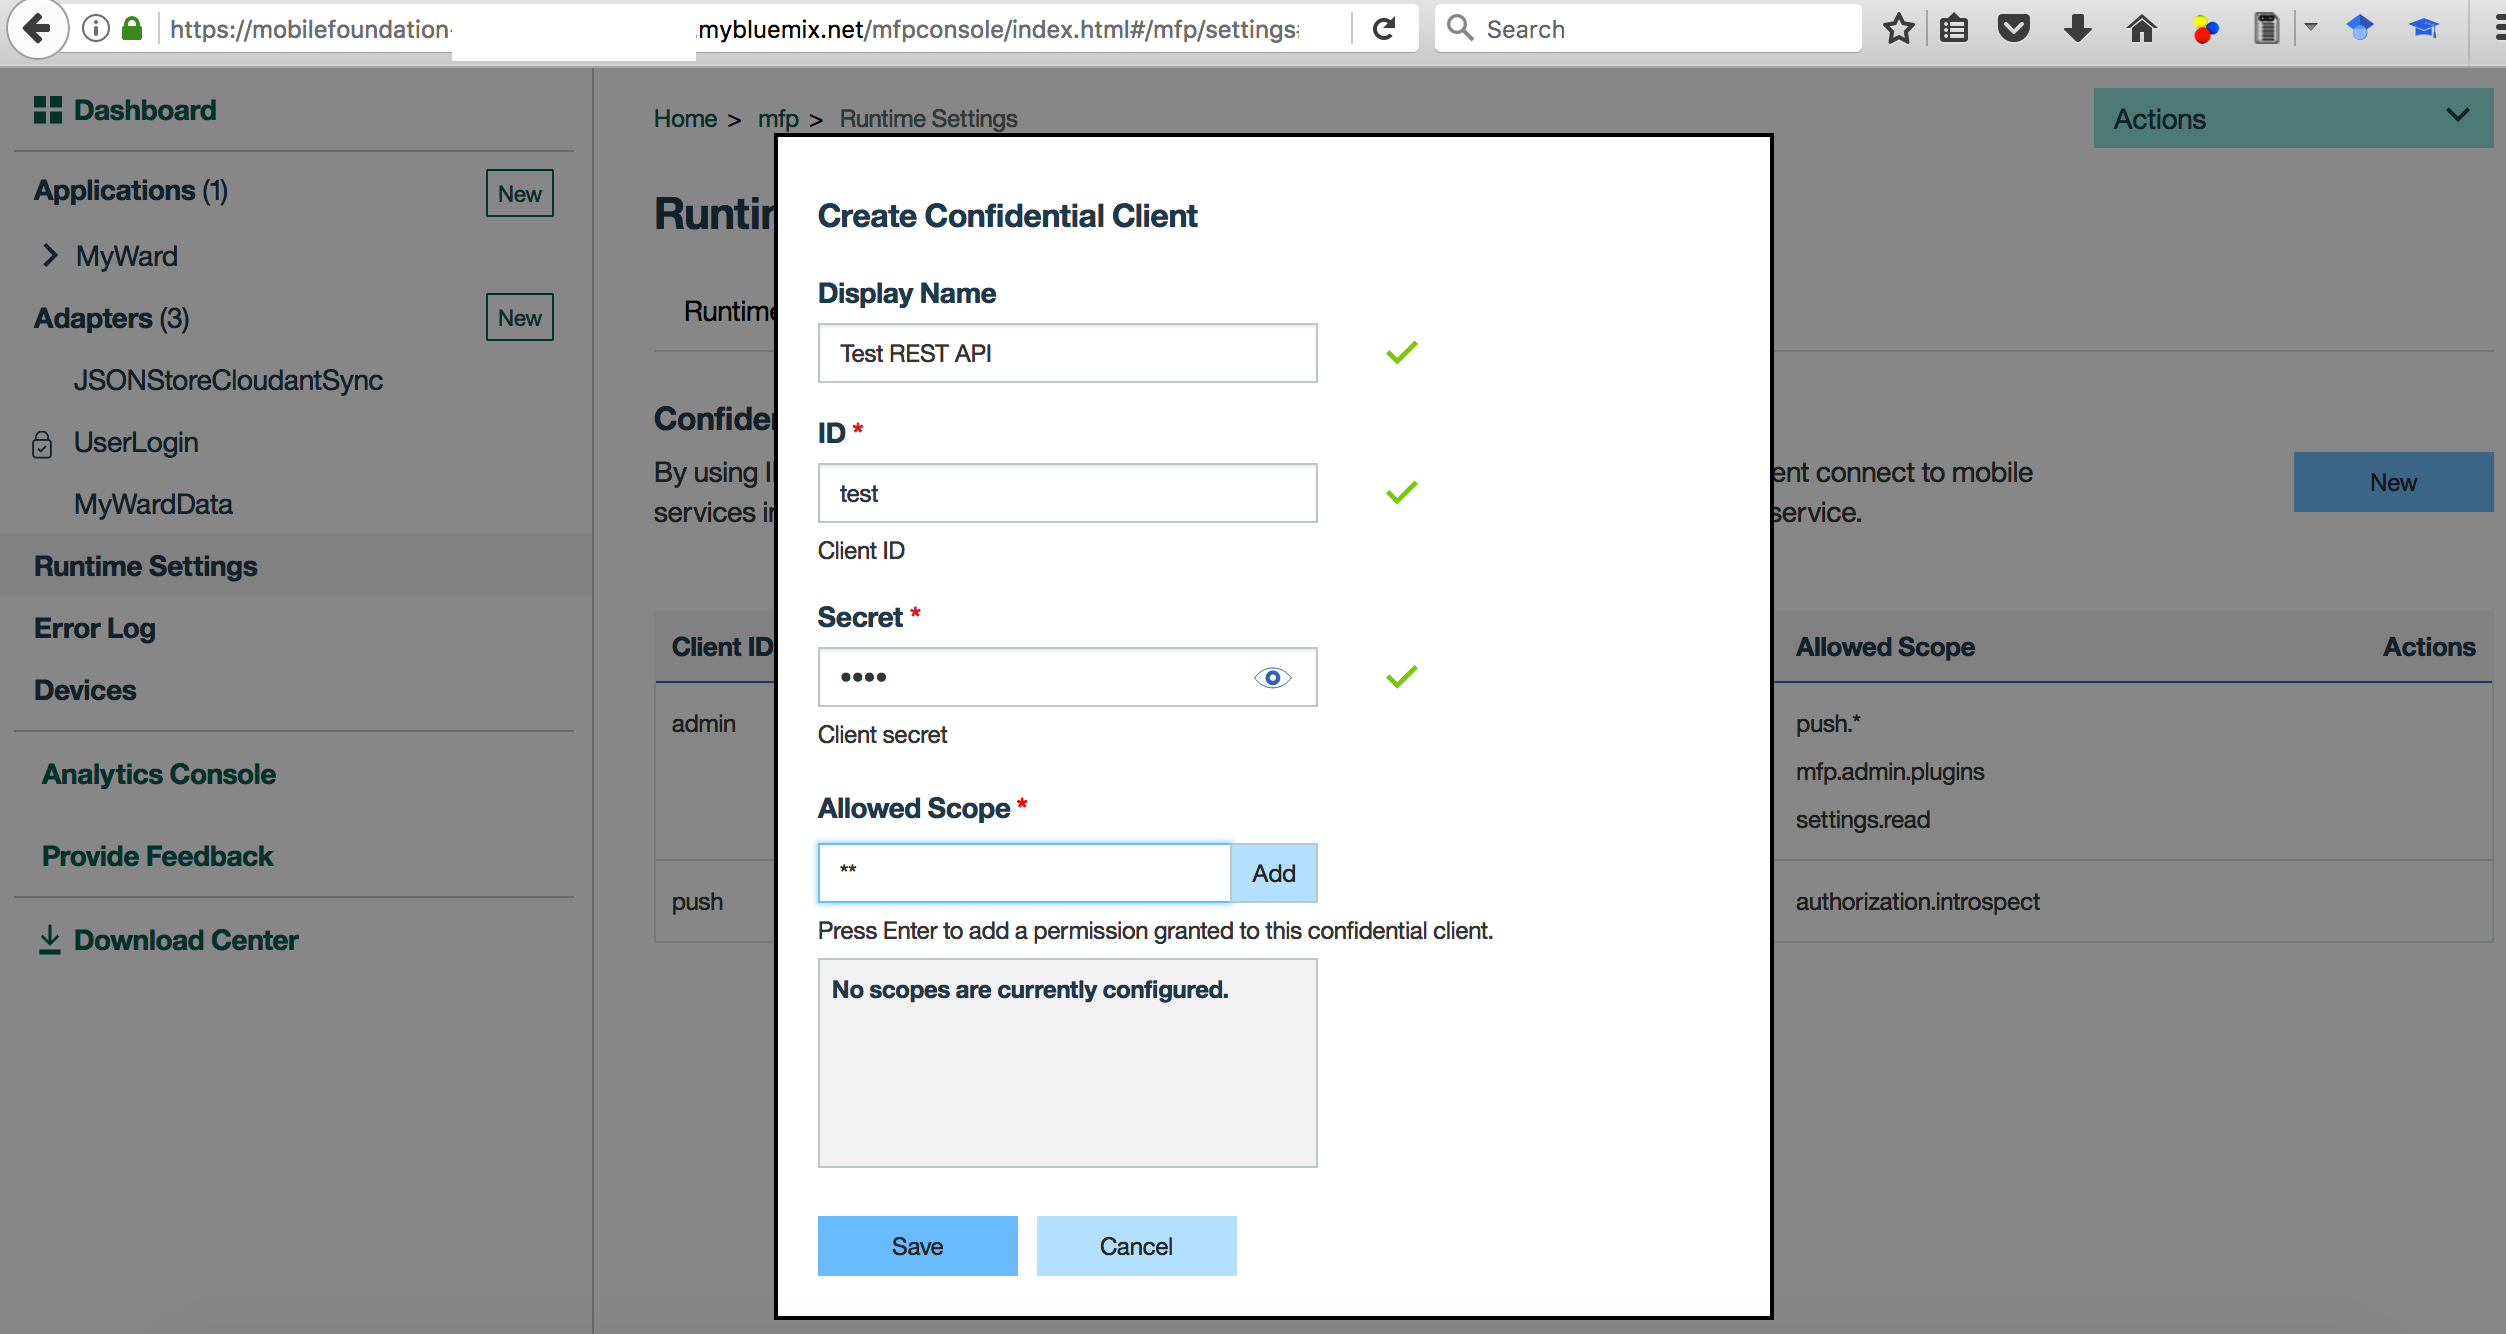 MFP - Create Confidential Client to test Adapter REST APIs